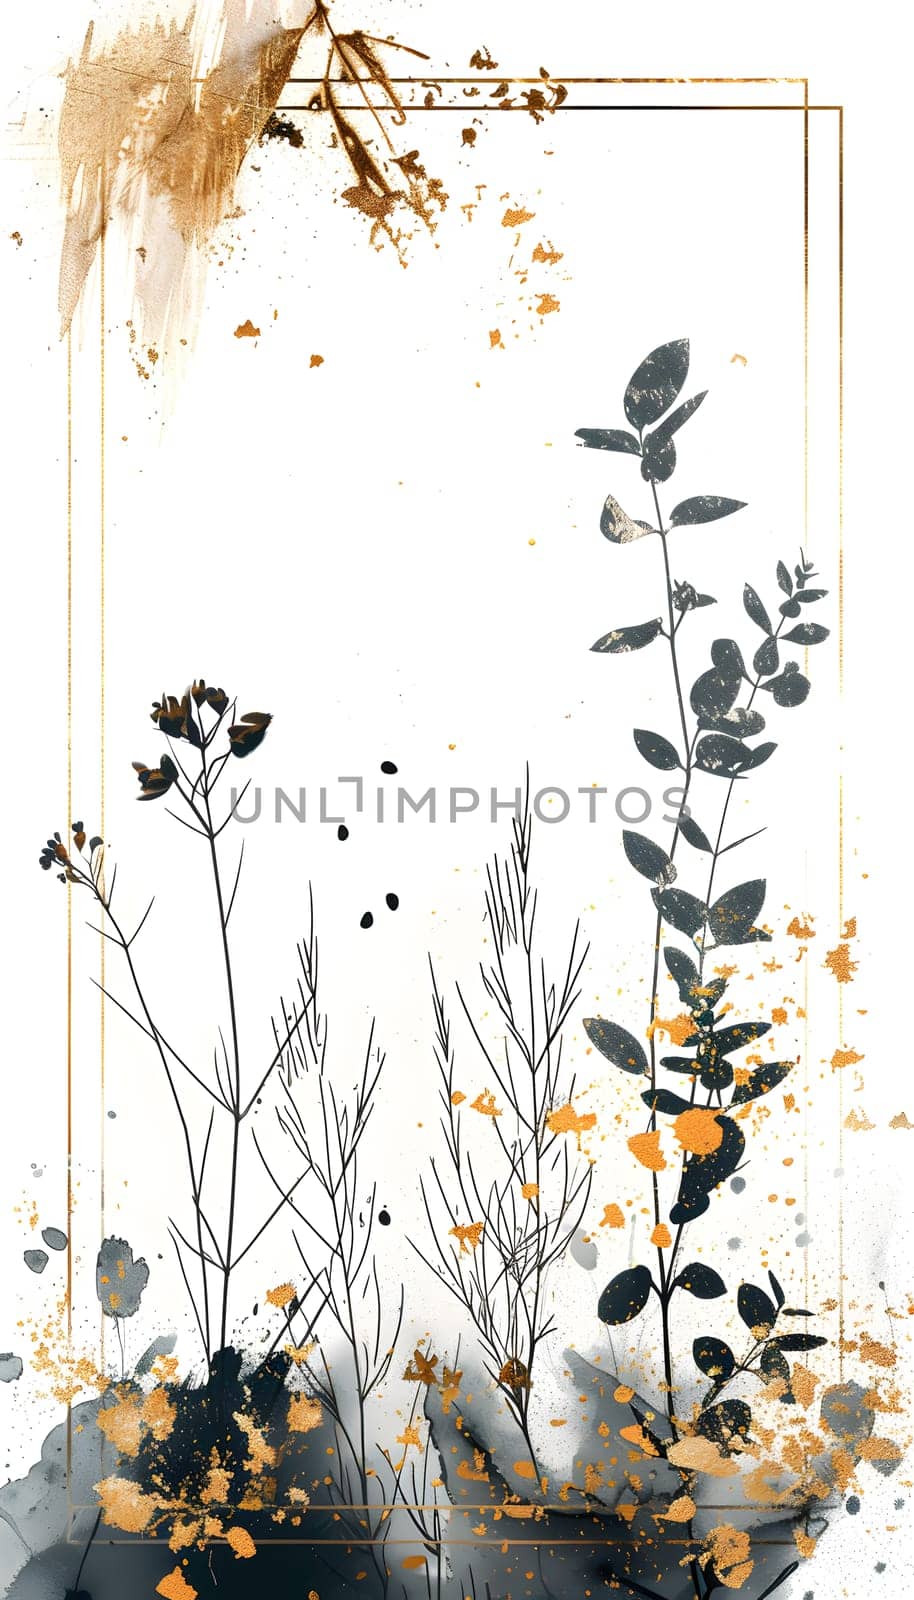 Art of flowers and leaves in a gold framed painting on white background by Nadtochiy